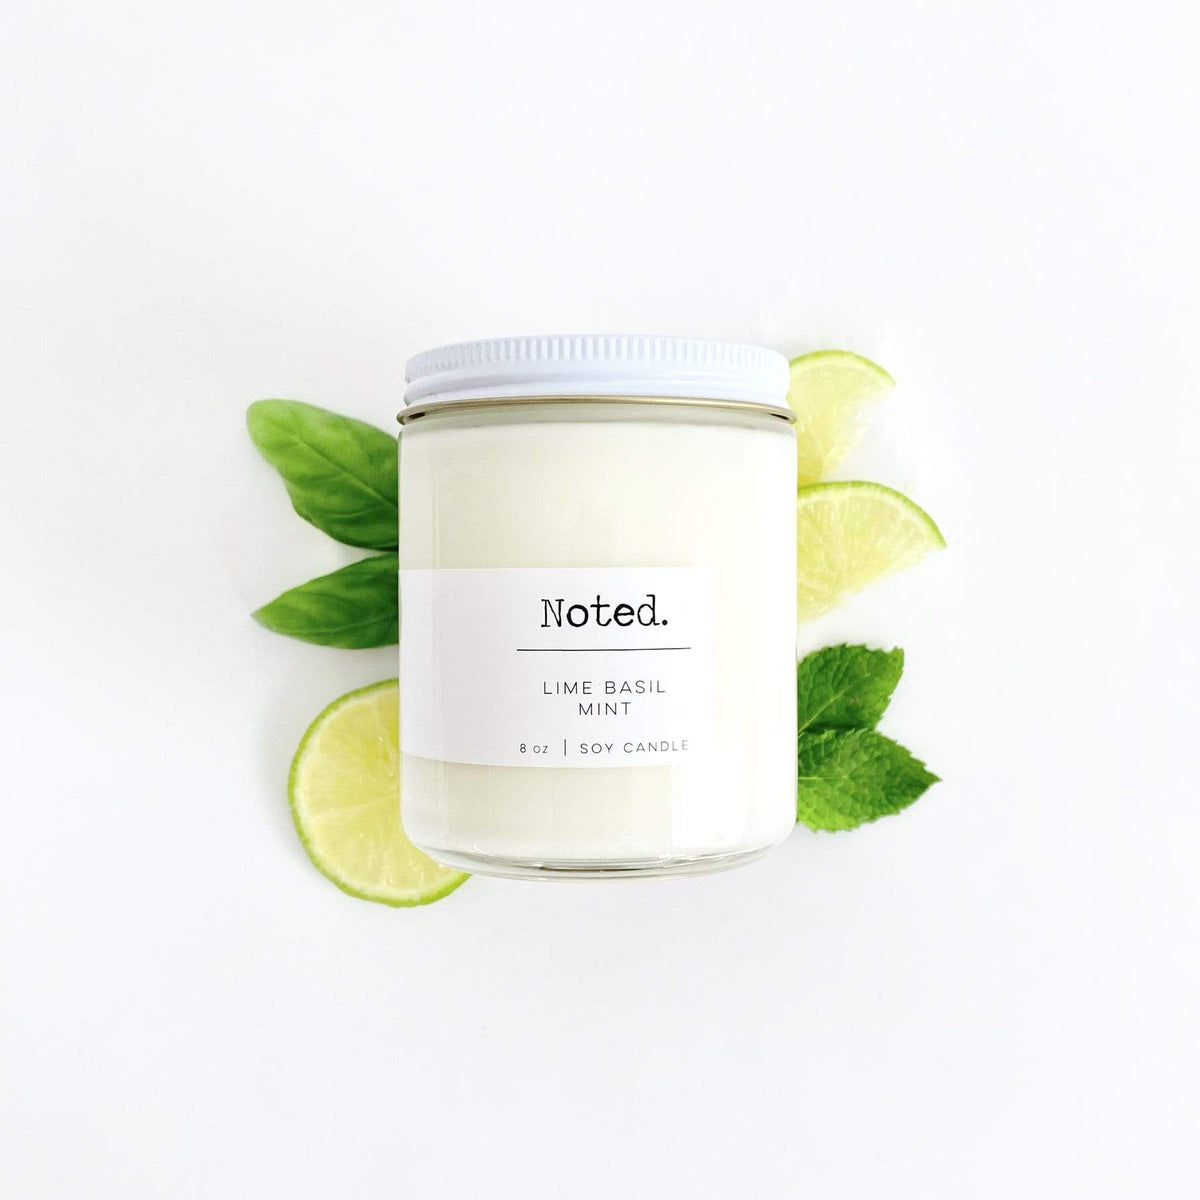 Noted Lime Basil Mint Jar Candle